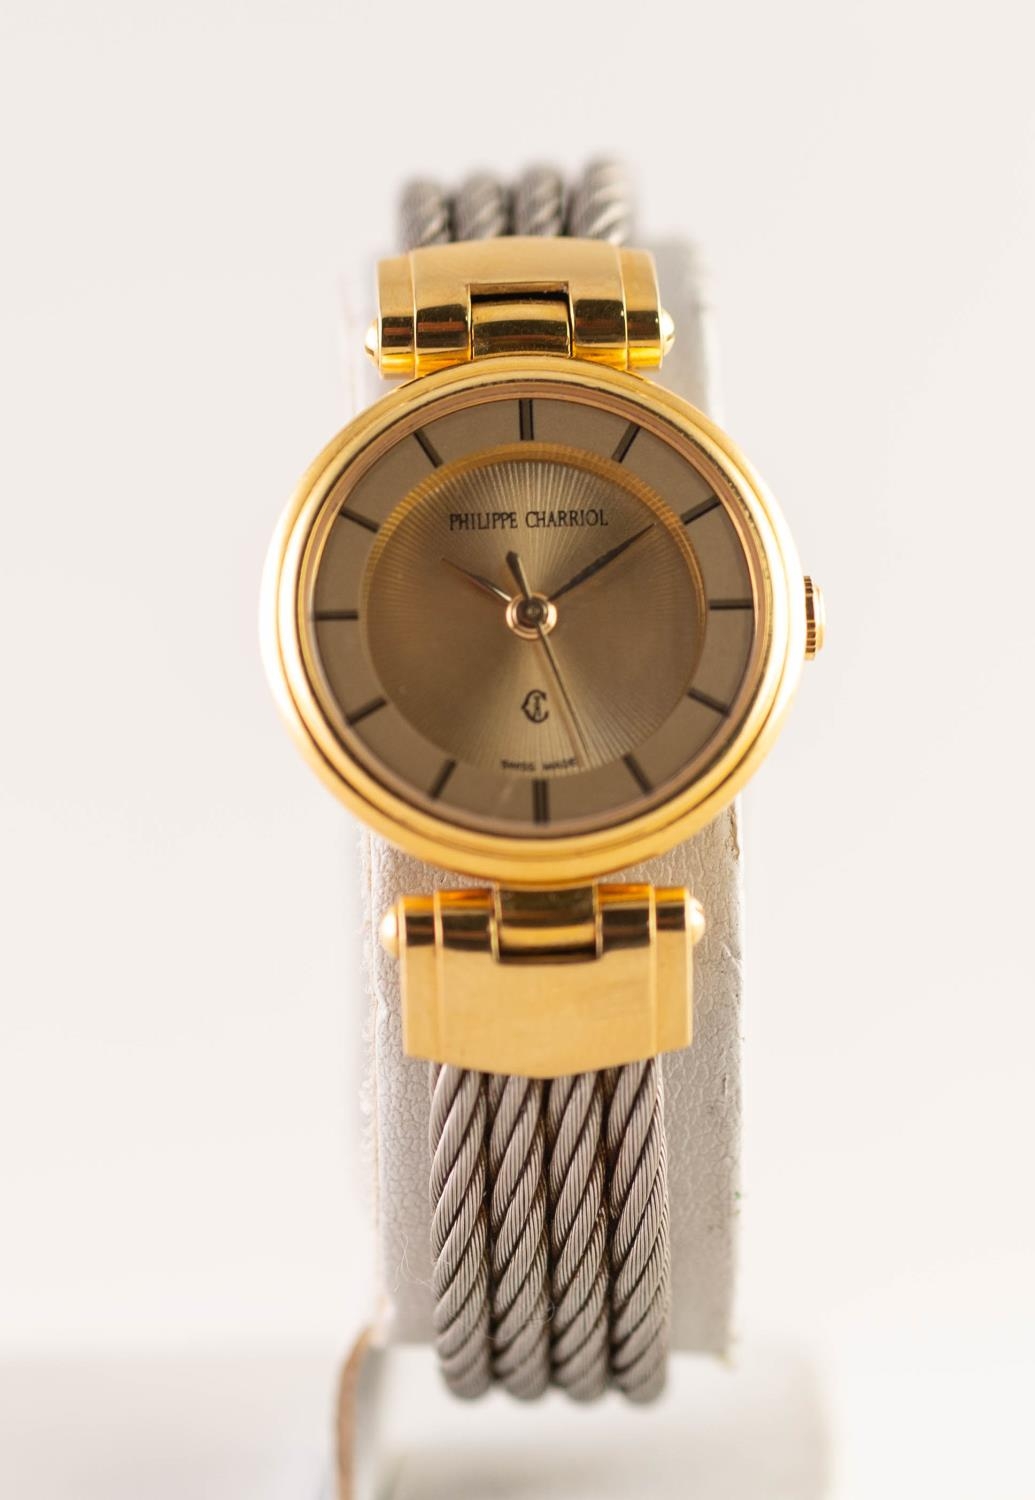 LADY'S PHILIPPE CHARRIOL QUARTZ WRISTWATCH, model no 61.95.0961, the champagne circular dial with - Image 2 of 4